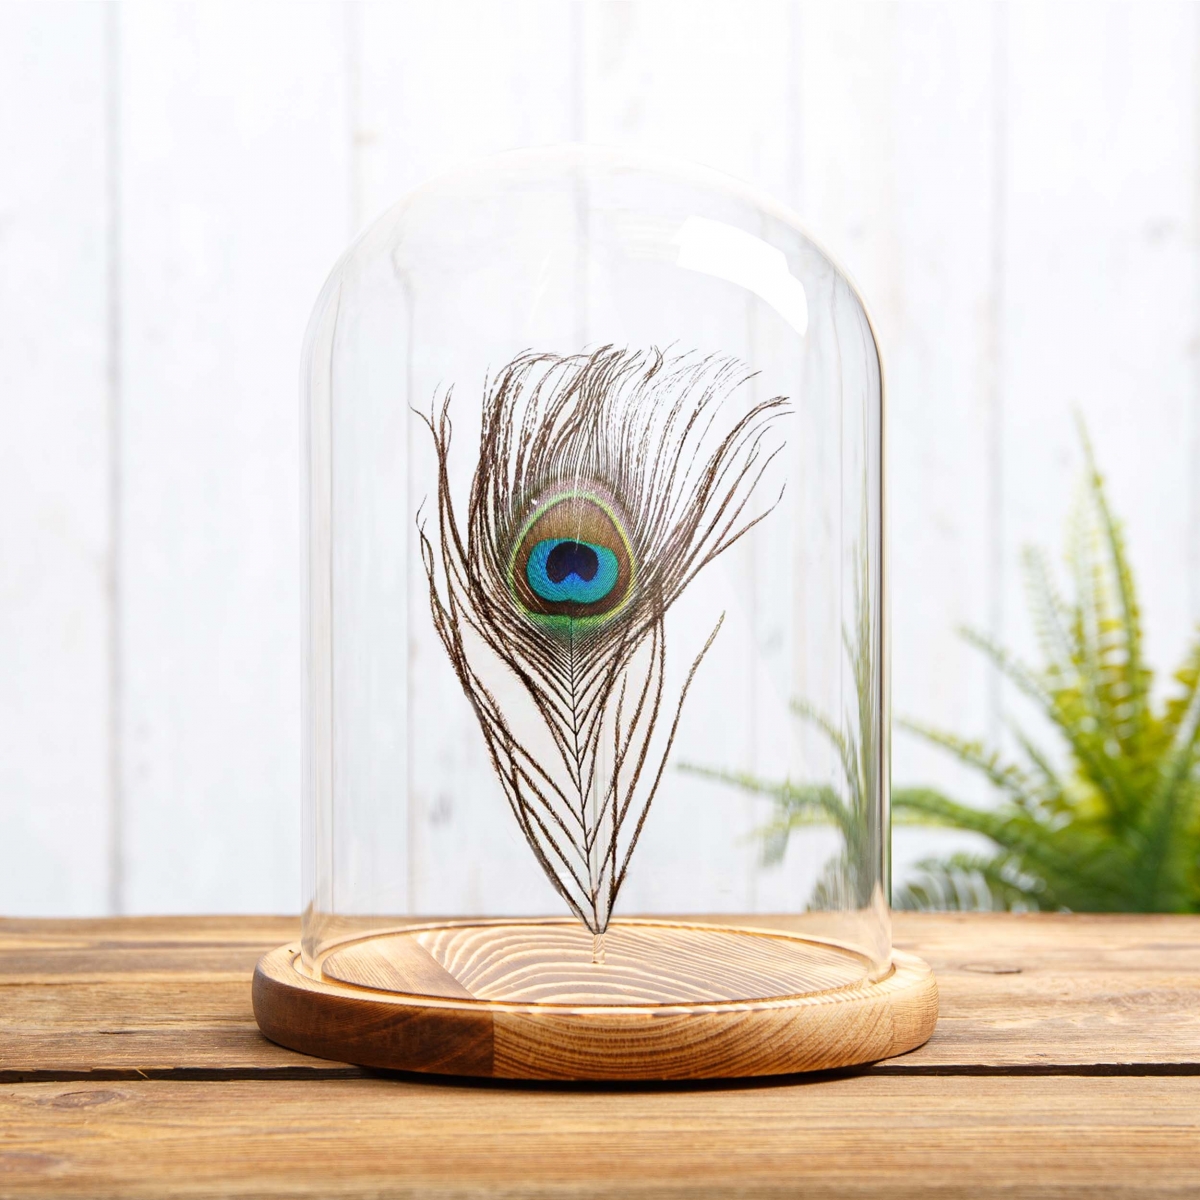 Peacock Feather from an Indian Peafowl in Glass Dome with Wooden Base (Pavo cristatus)